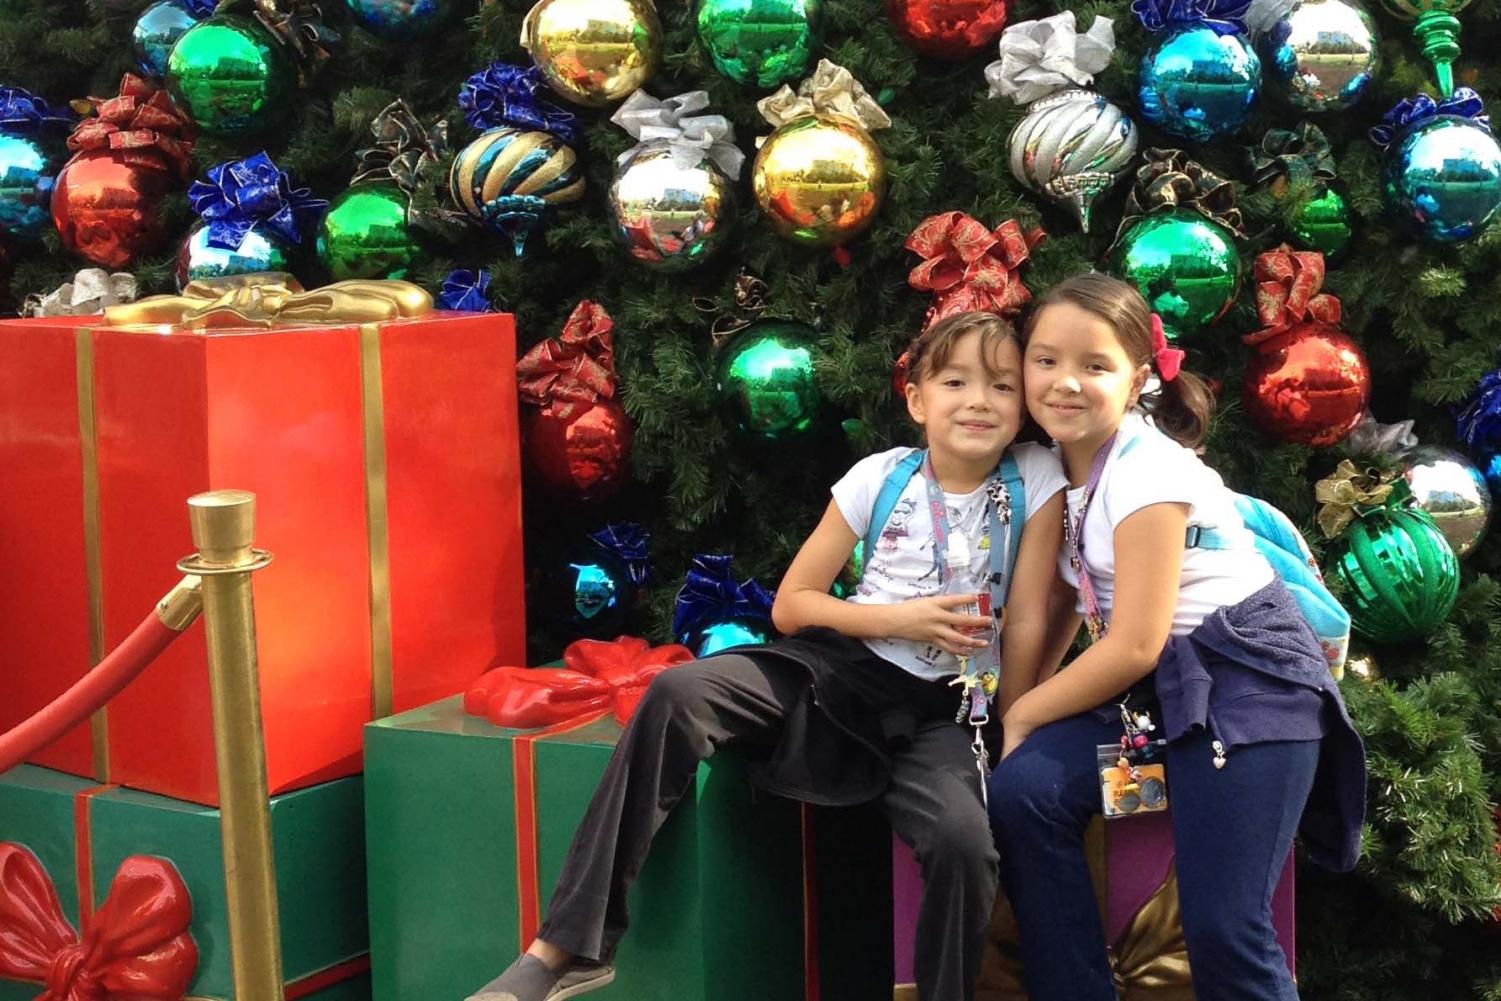 Sisters Lina Urquiza ‘22 and Siena Urquiza ‘23 smile for a photo in Downtown Disney just a few days before Christmas of 2015.